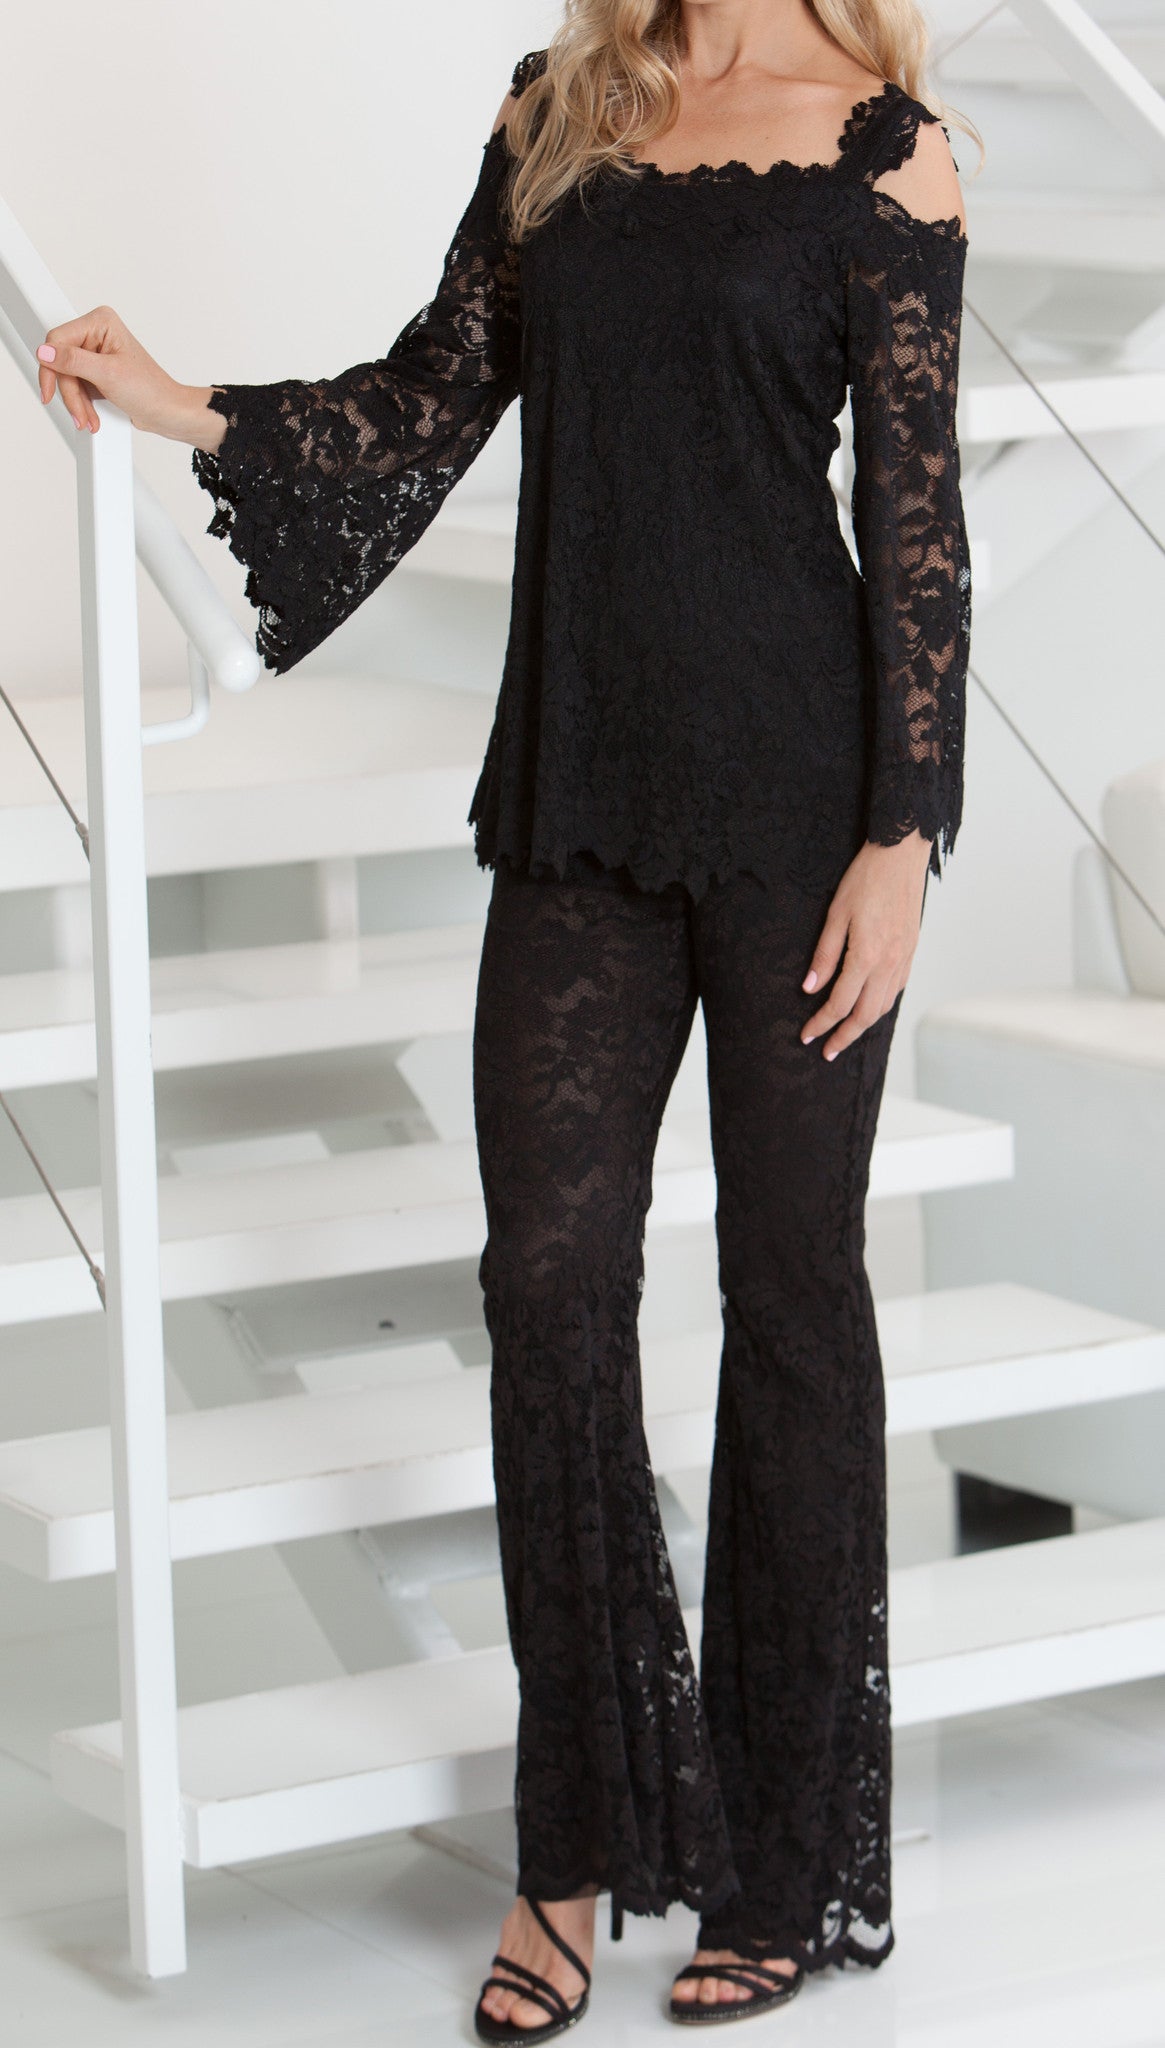 French Lace Cold Shoulder Blouse - B611  (P605 45" French Lace Pant Sold Separately) - Sara Mique Evening Wear